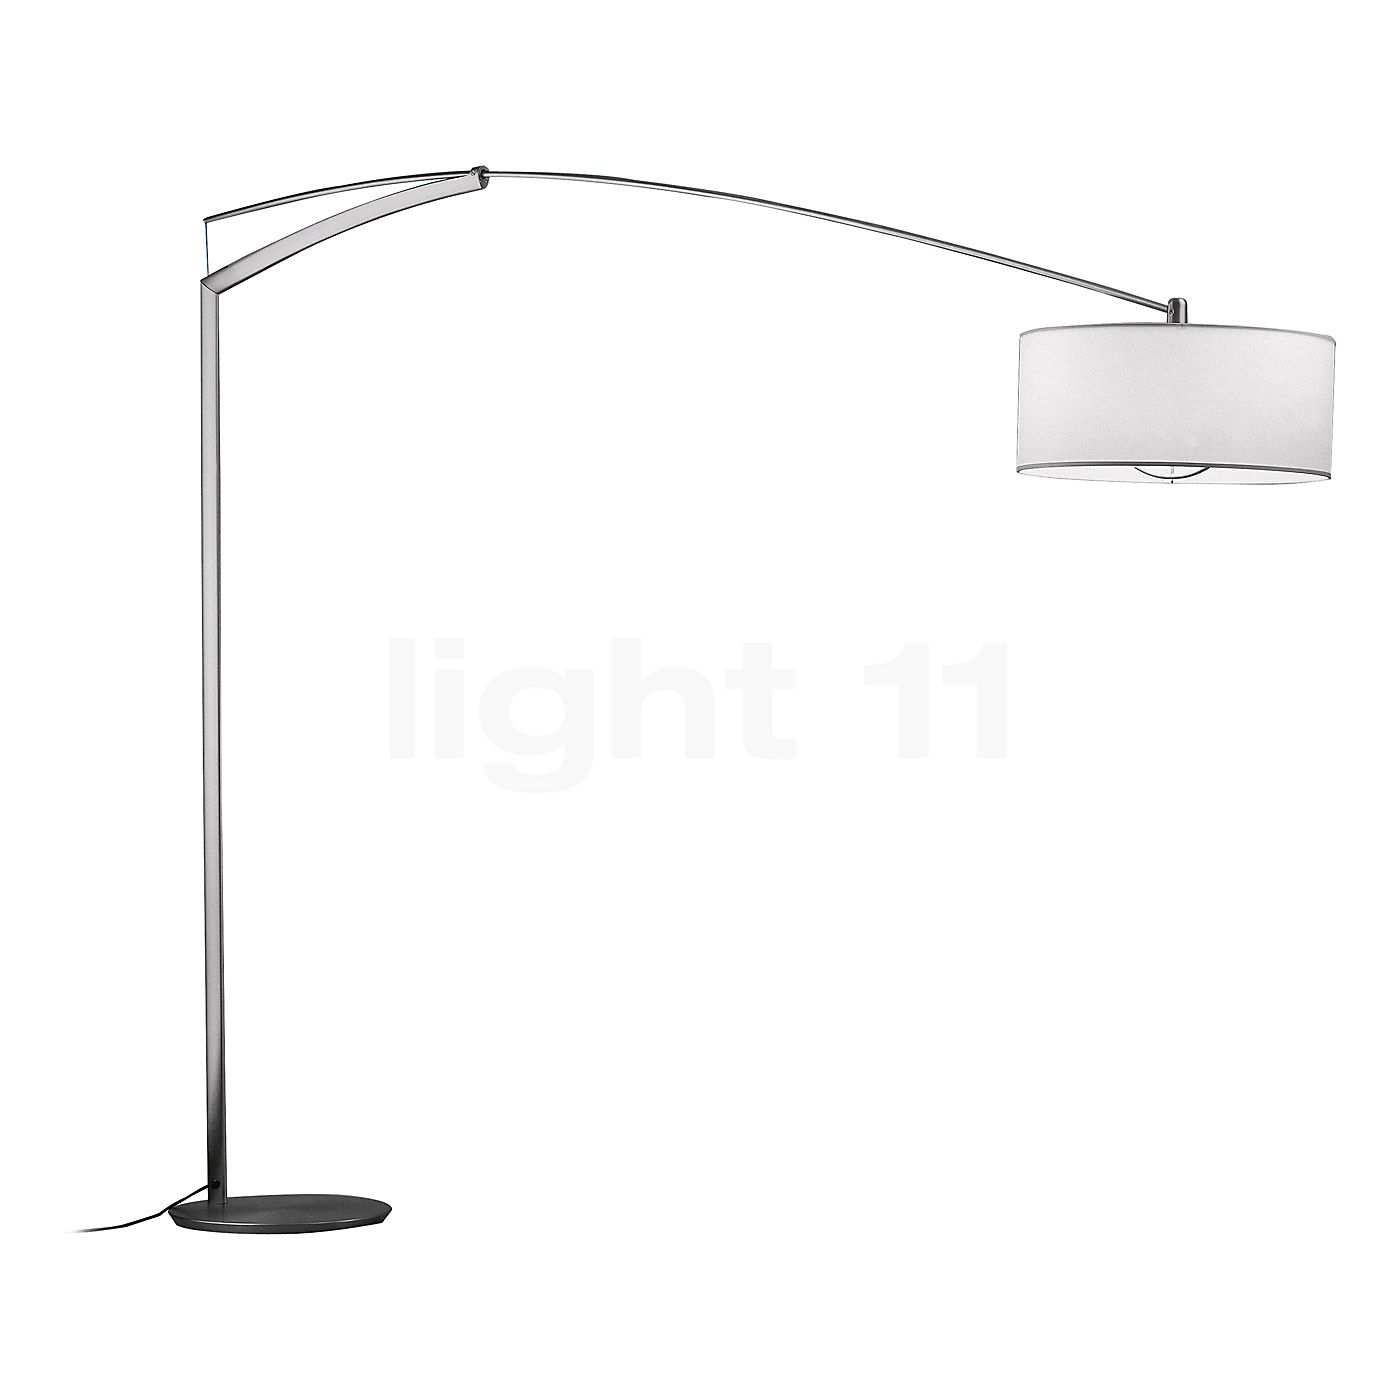 Vibia Balance Grande 3229 Euro In 2019 Lighting Floor throughout dimensions 1400 X 1400